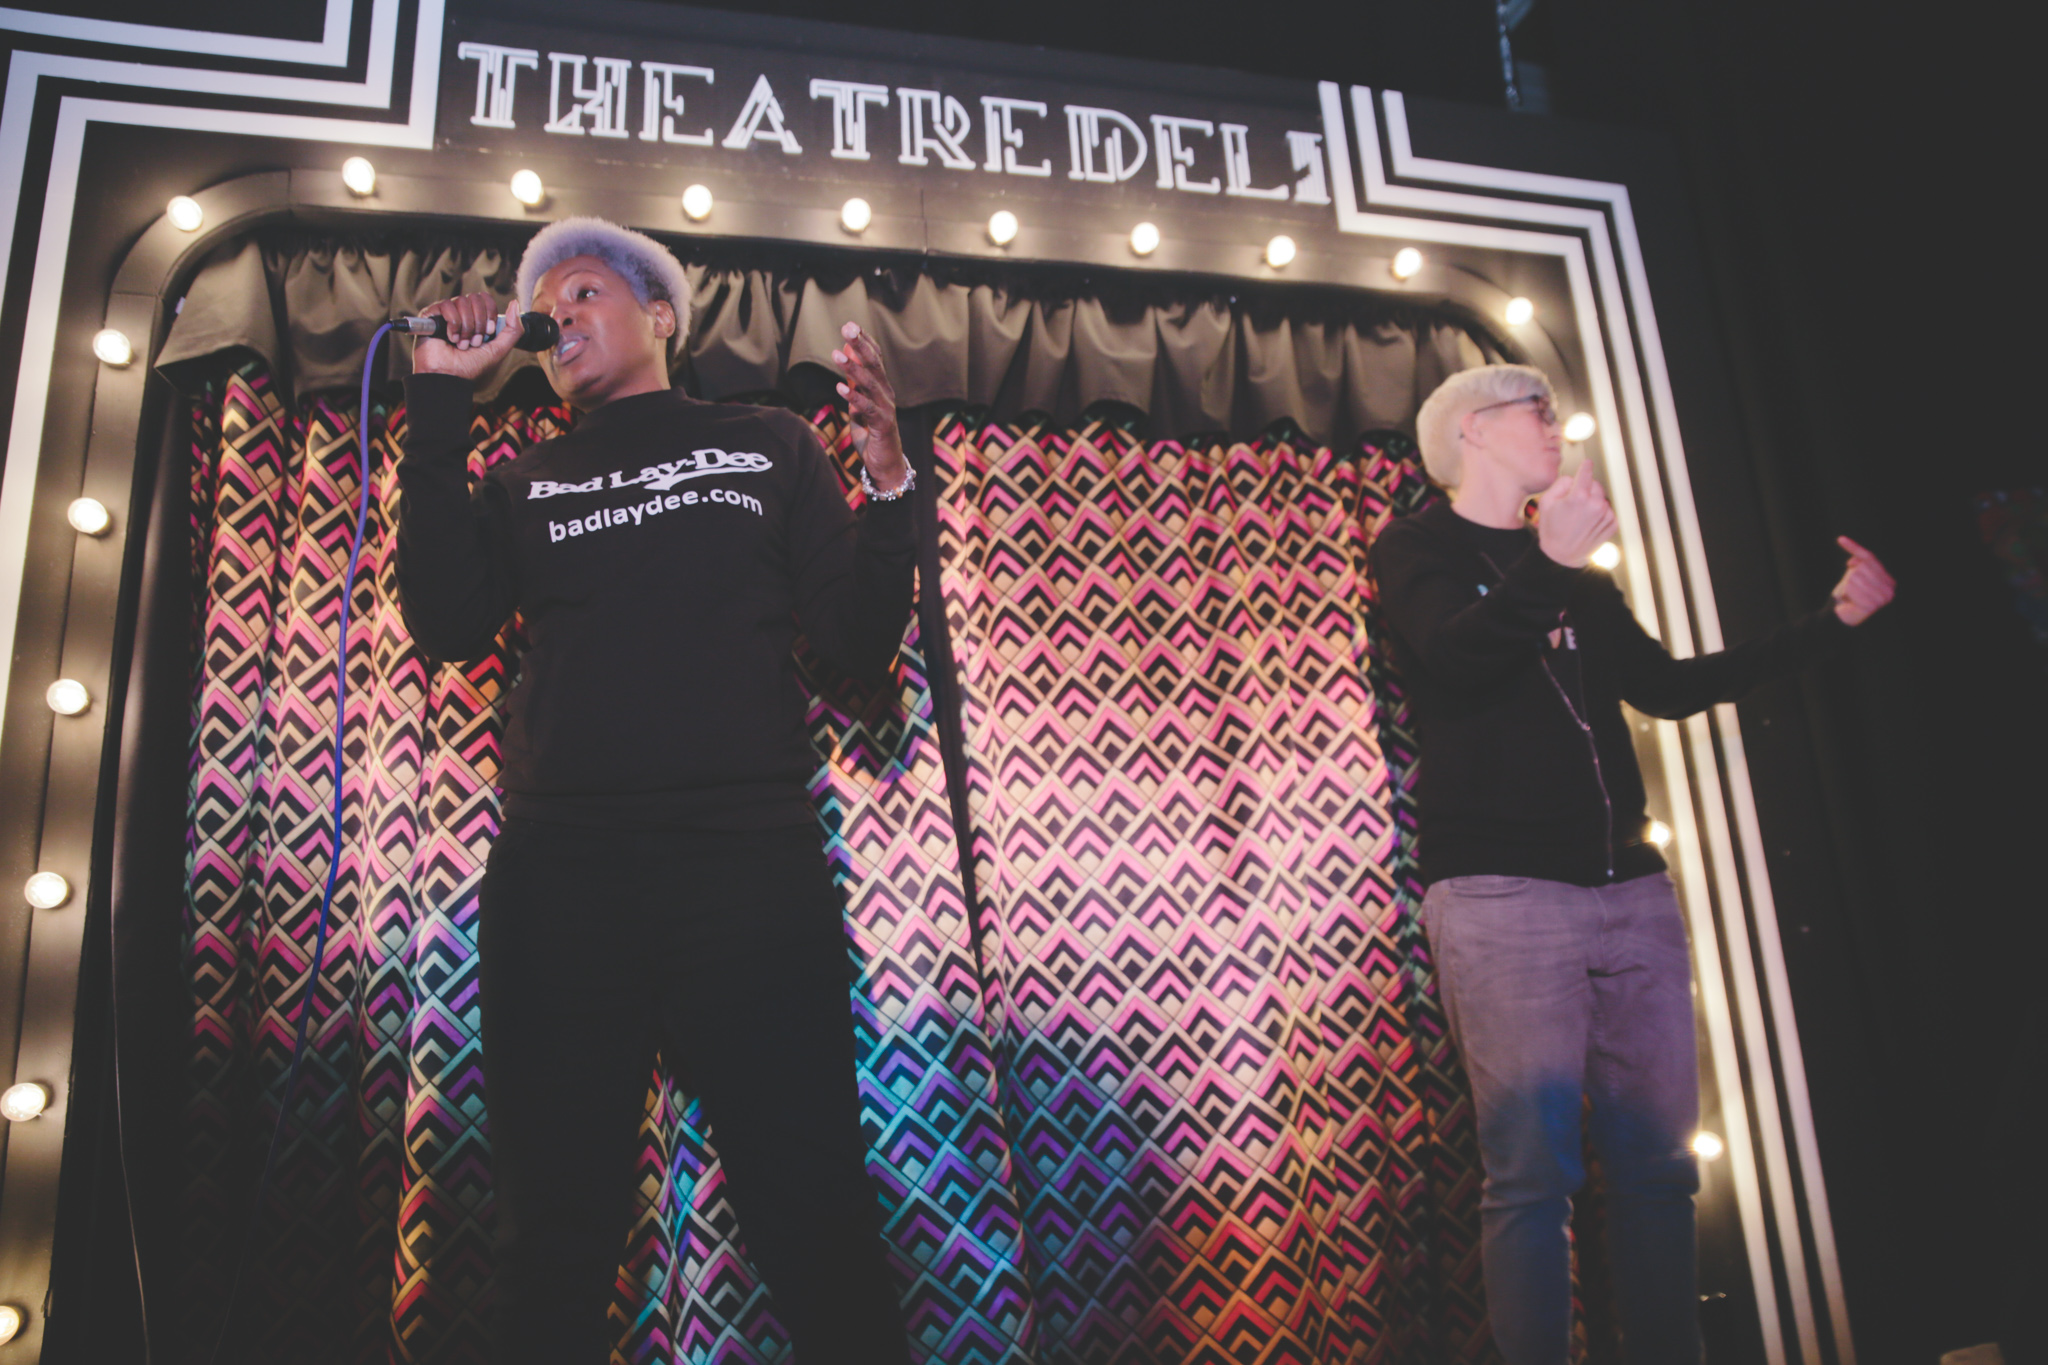 A Black, androgynous person stands on the right hand side of small stage speaking on a microphone. They are wearing a black tee with the words 'Bad Lay Dee' in white letters and black jeans. Their hair is short and bleached. On the right hand side of the stage is a BSL interpreter who is gesturing. She has cropped bleach blonde hair and is white. She wears a black hoodie and blue jeans. Behind the stage is a patterned pink curtain with warm white lightbulb surrounding, and Theatre Deli painted in white letters.